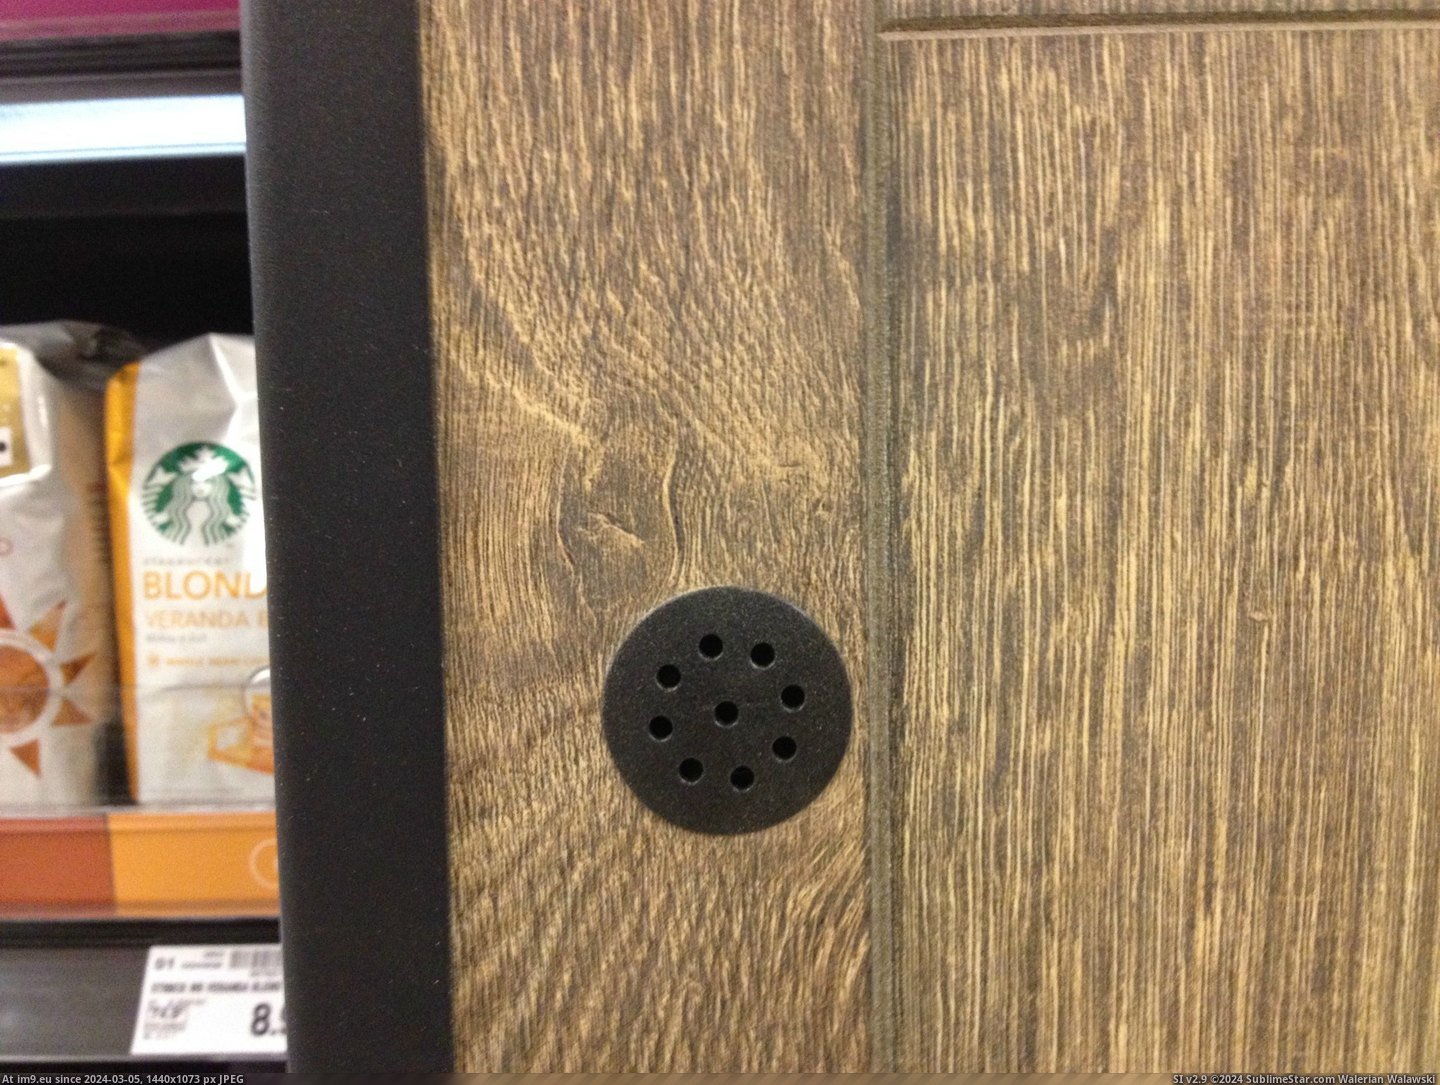 #Work #New #Secret #Smell #Delivery #Starbucks #Coffee #System #Display [Mildlyinteresting] The new Starbucks display at my work has a secret coffee smell delivery system. 4 Pic. (Bild von album My r/MILDLYINTERESTING favs))